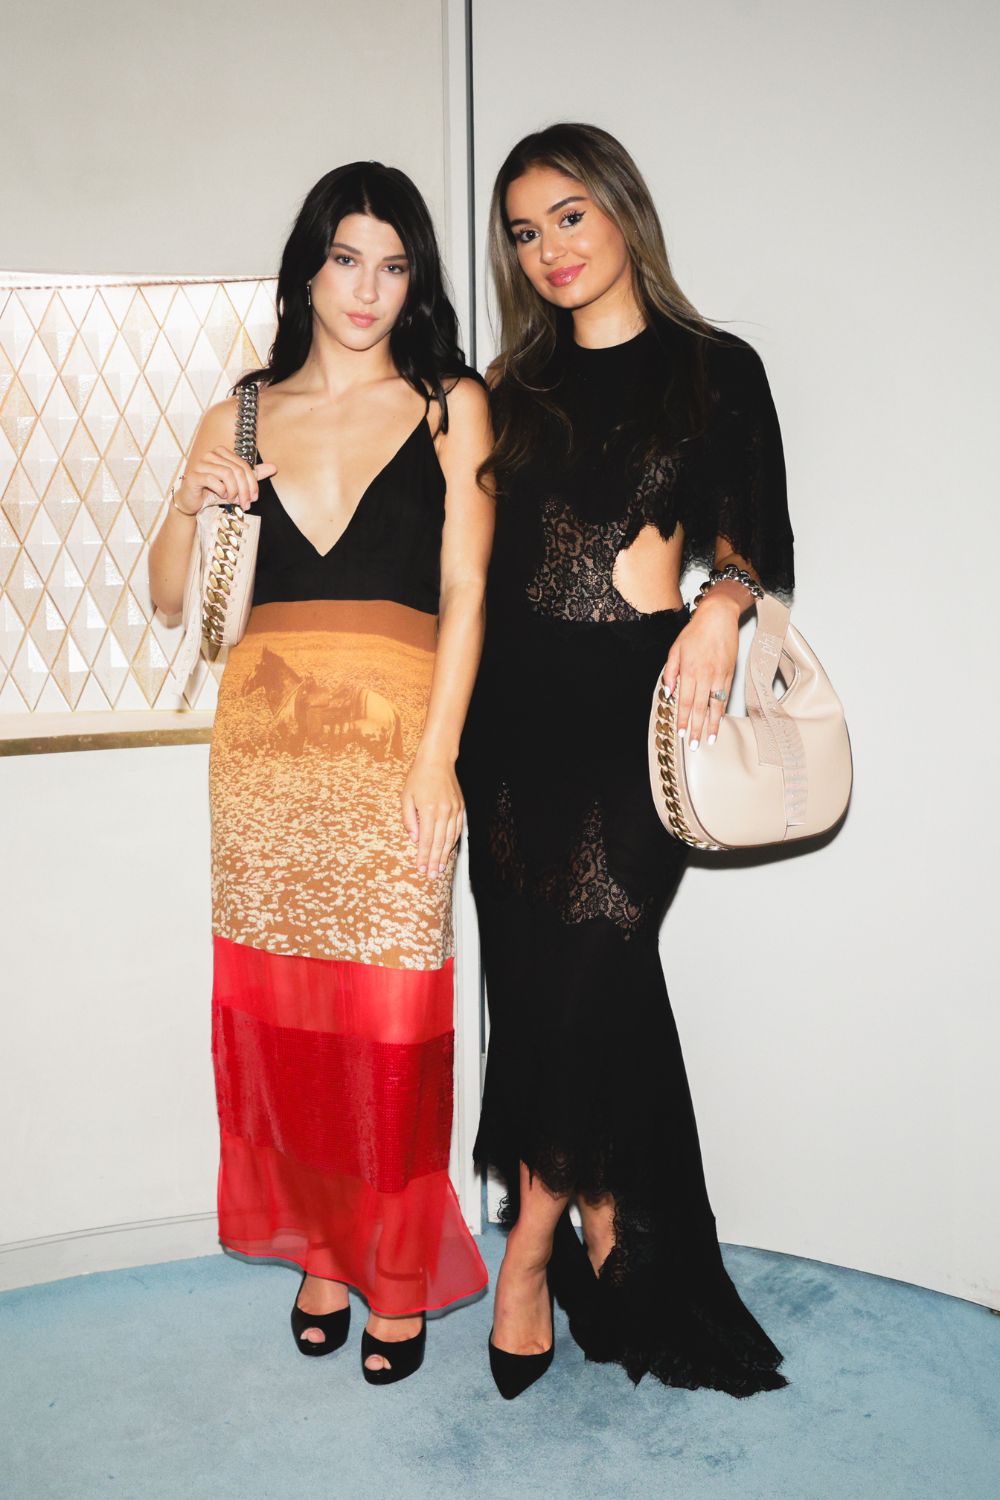 Stella McCartney x Phia’s Sophia Kianni And Phoebe Gates Host Preview For Limited-Edition Collaboration